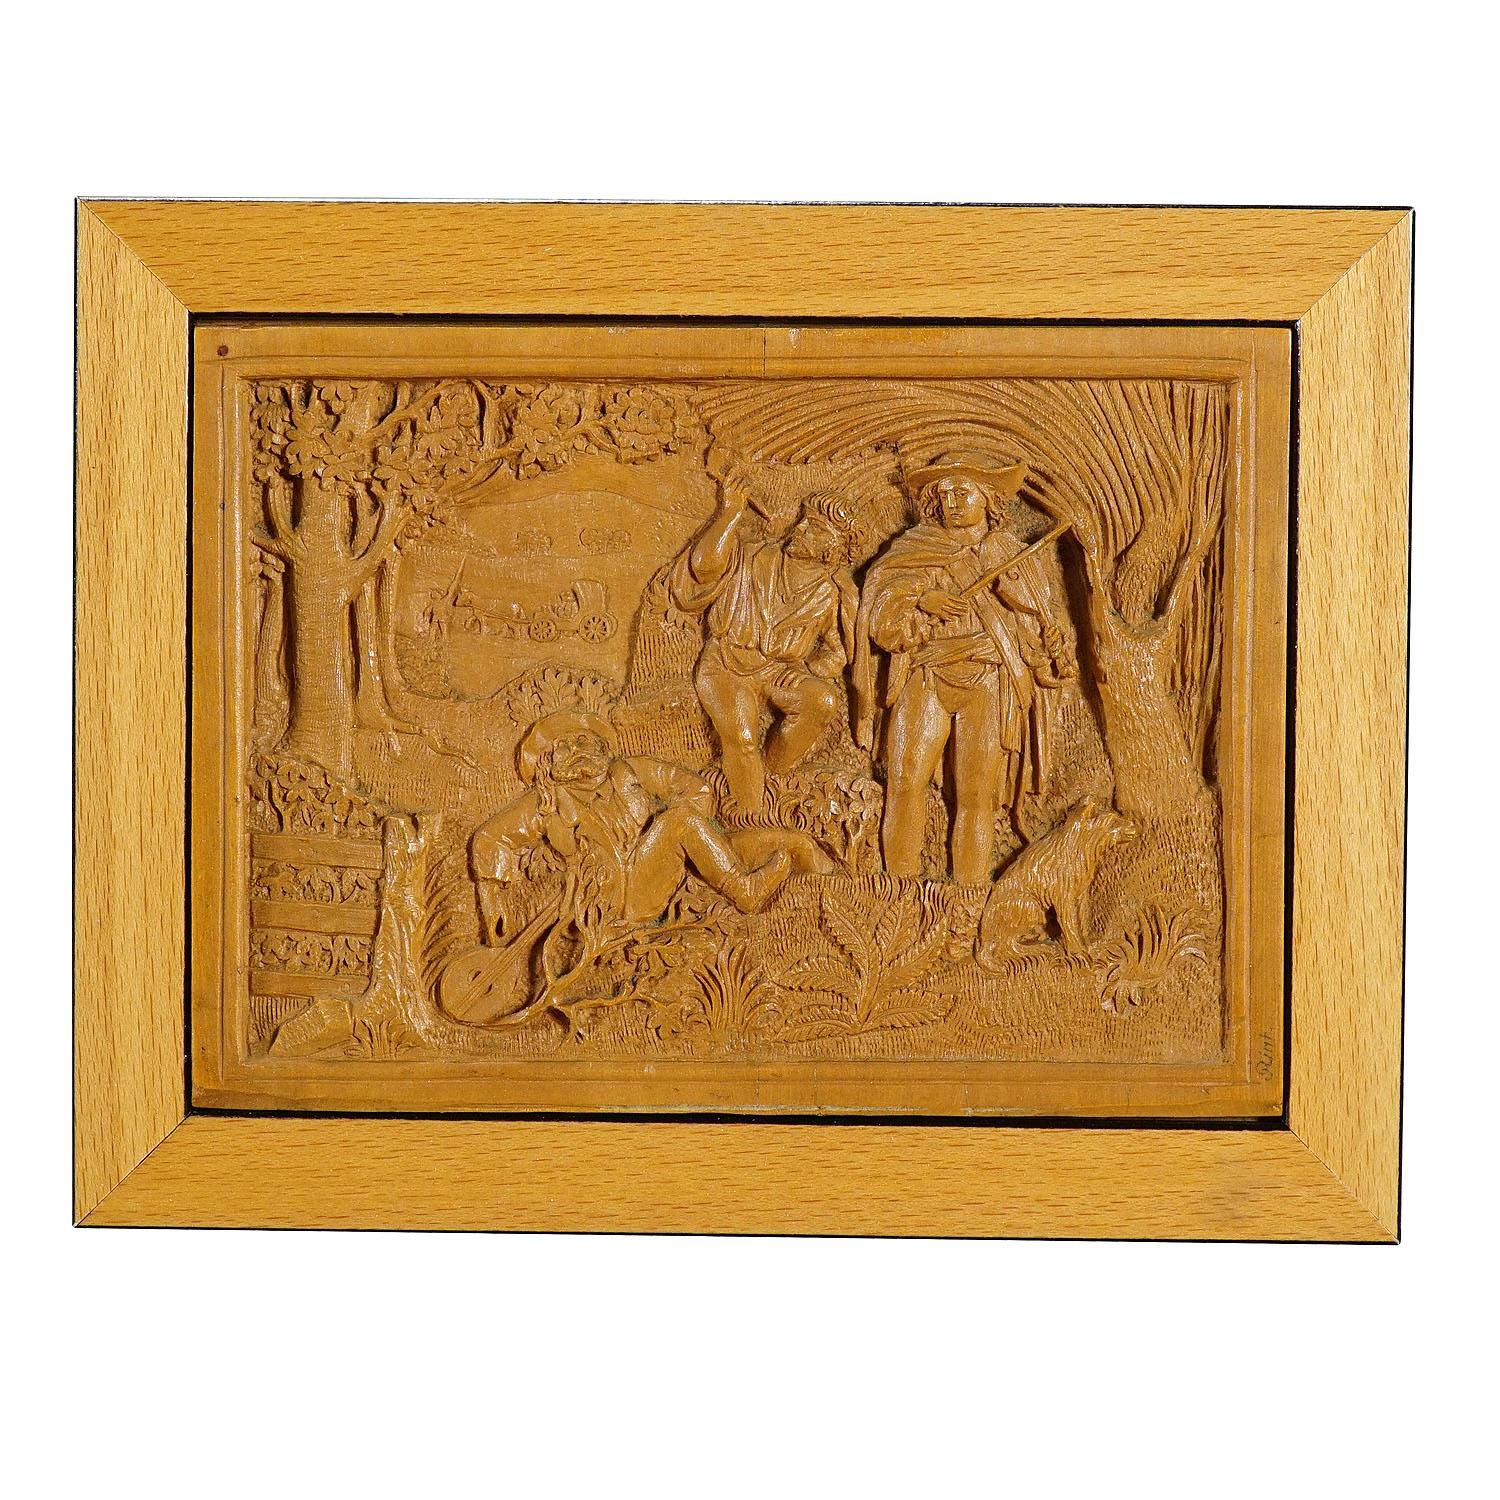 Wooden Micro Carving Plaque by Johann Rint ca. 1880

A small wall plaque with detailed relief carvings worked out of linden wood by Johann Rint ca. 1880. Probably depicting a scene after stories by Joseph Victor von Scheffel - a famous German